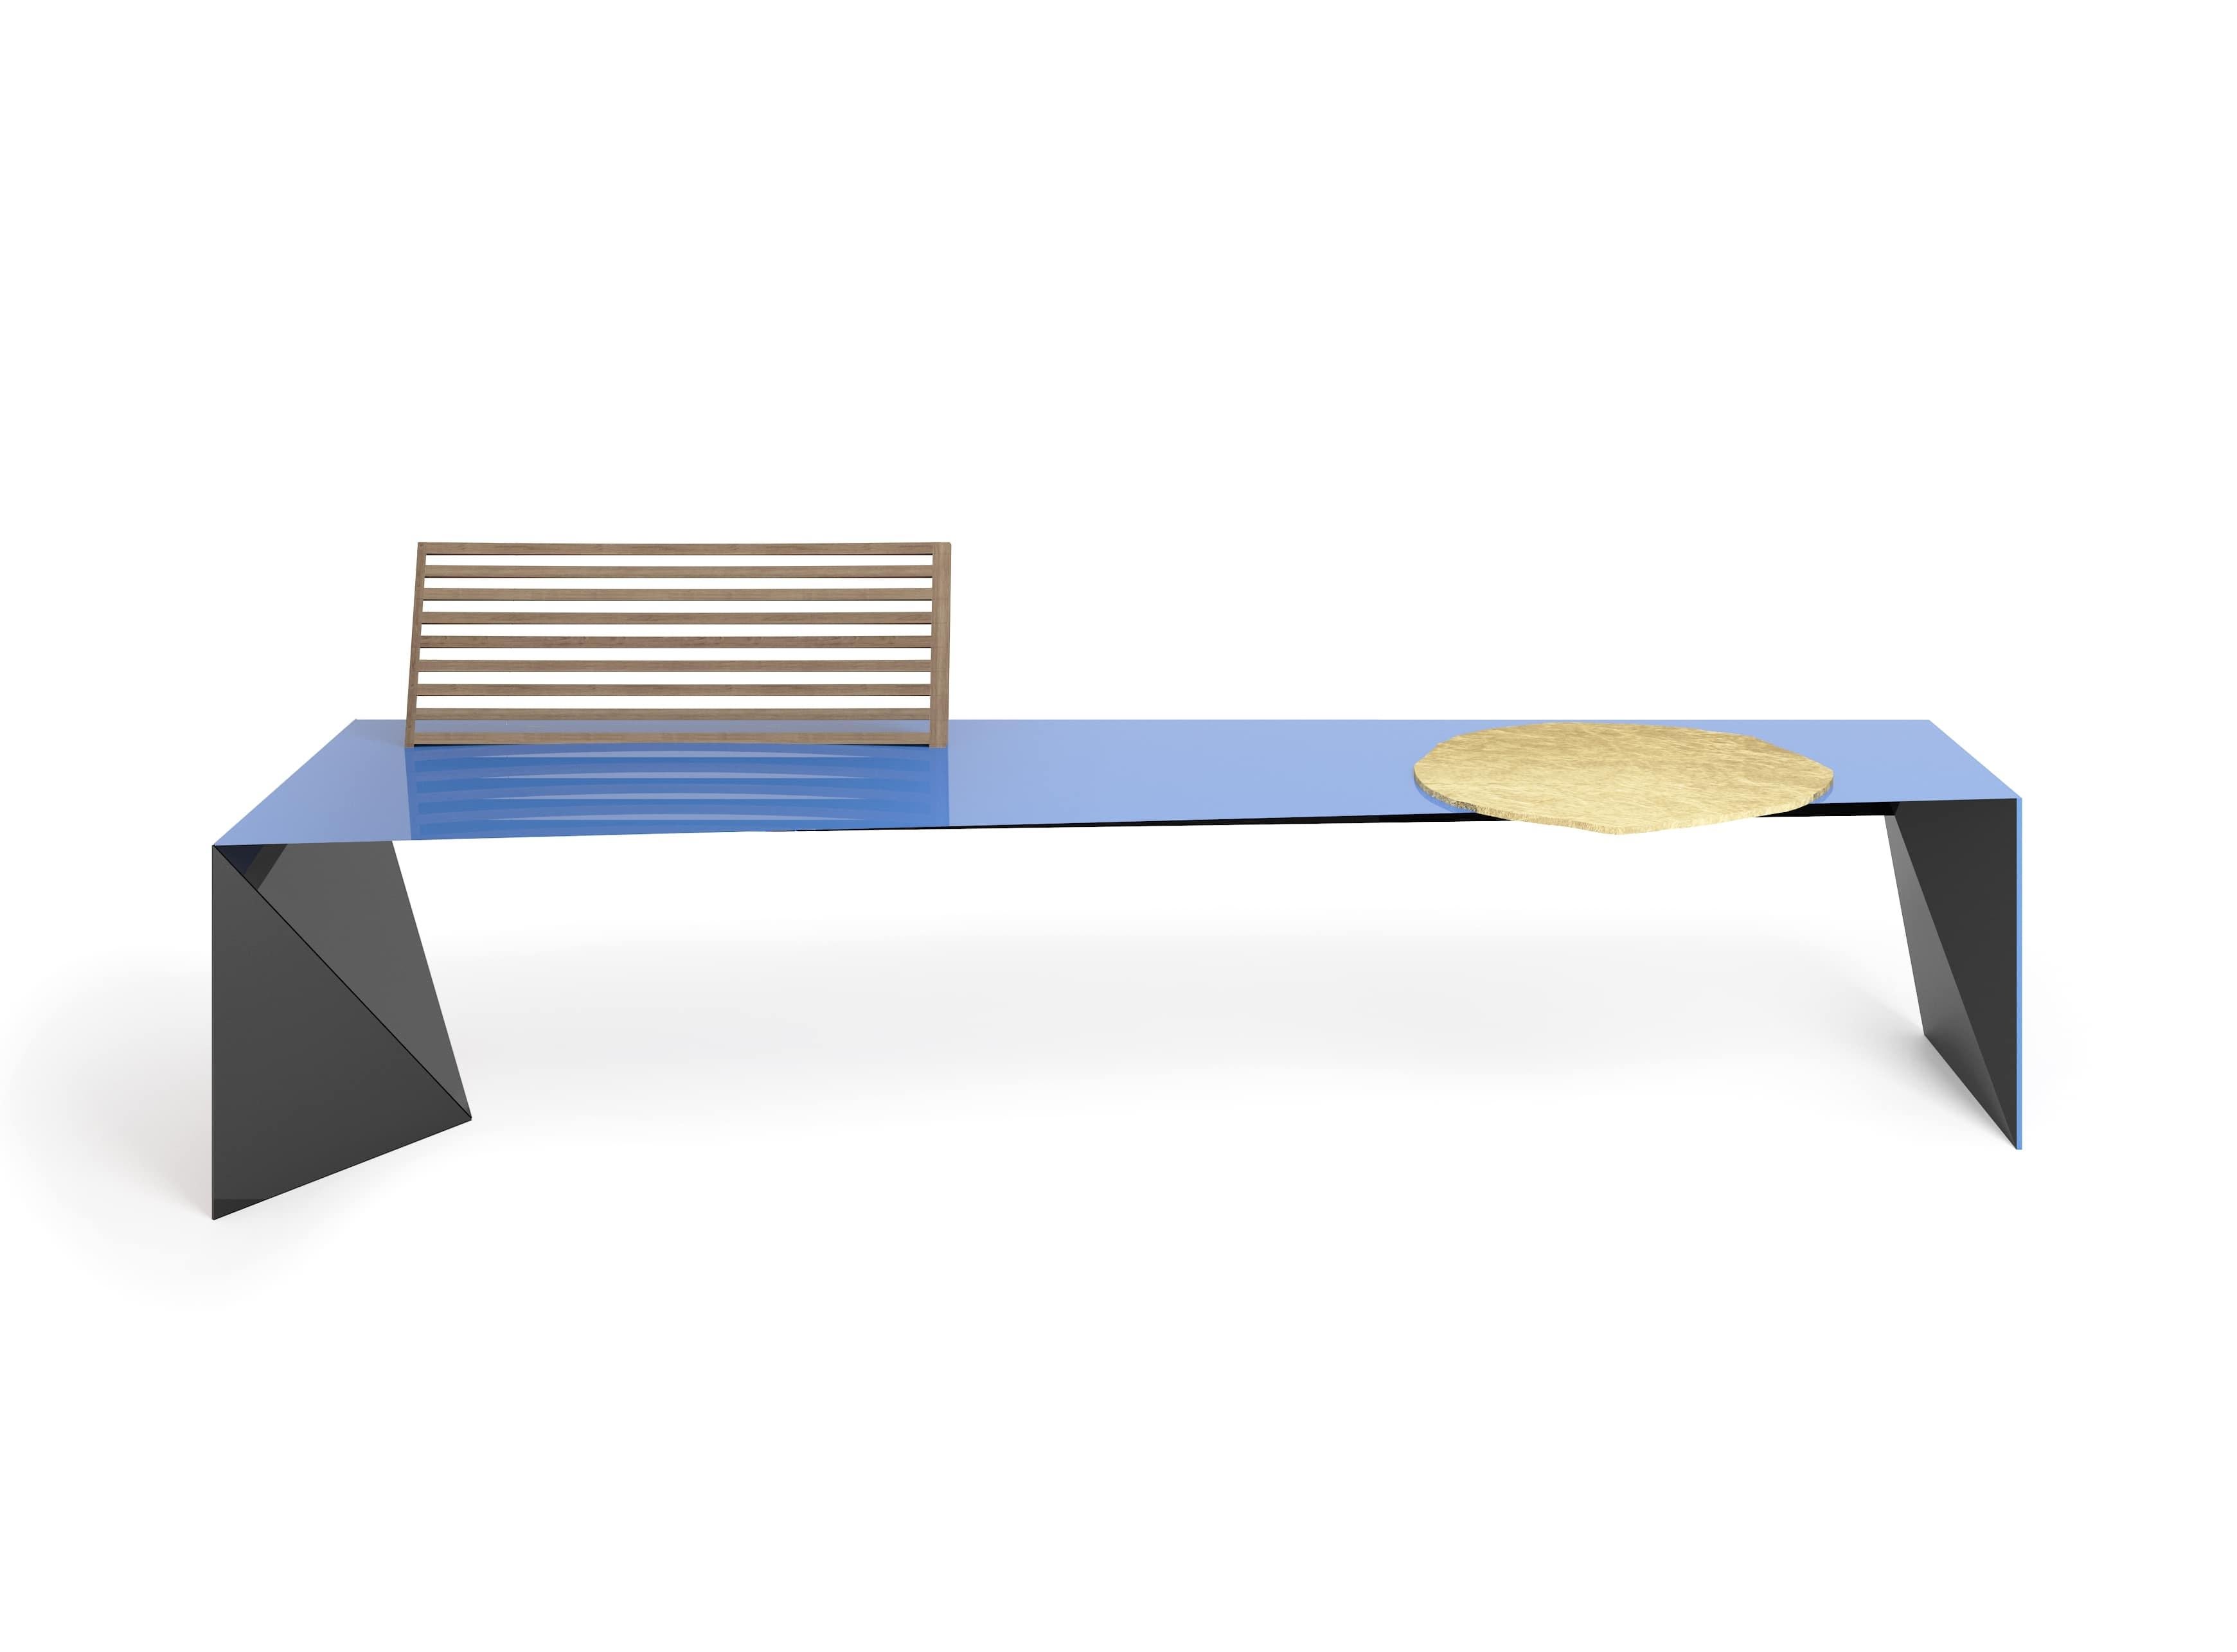 Playful reinterpretation.

Sunwind reflects material balance and stretches the imagination, accentuating an aspect of fantasy and modern design. With exquisite details, Sunwind is a statement mid-century bench for art lovers.

 